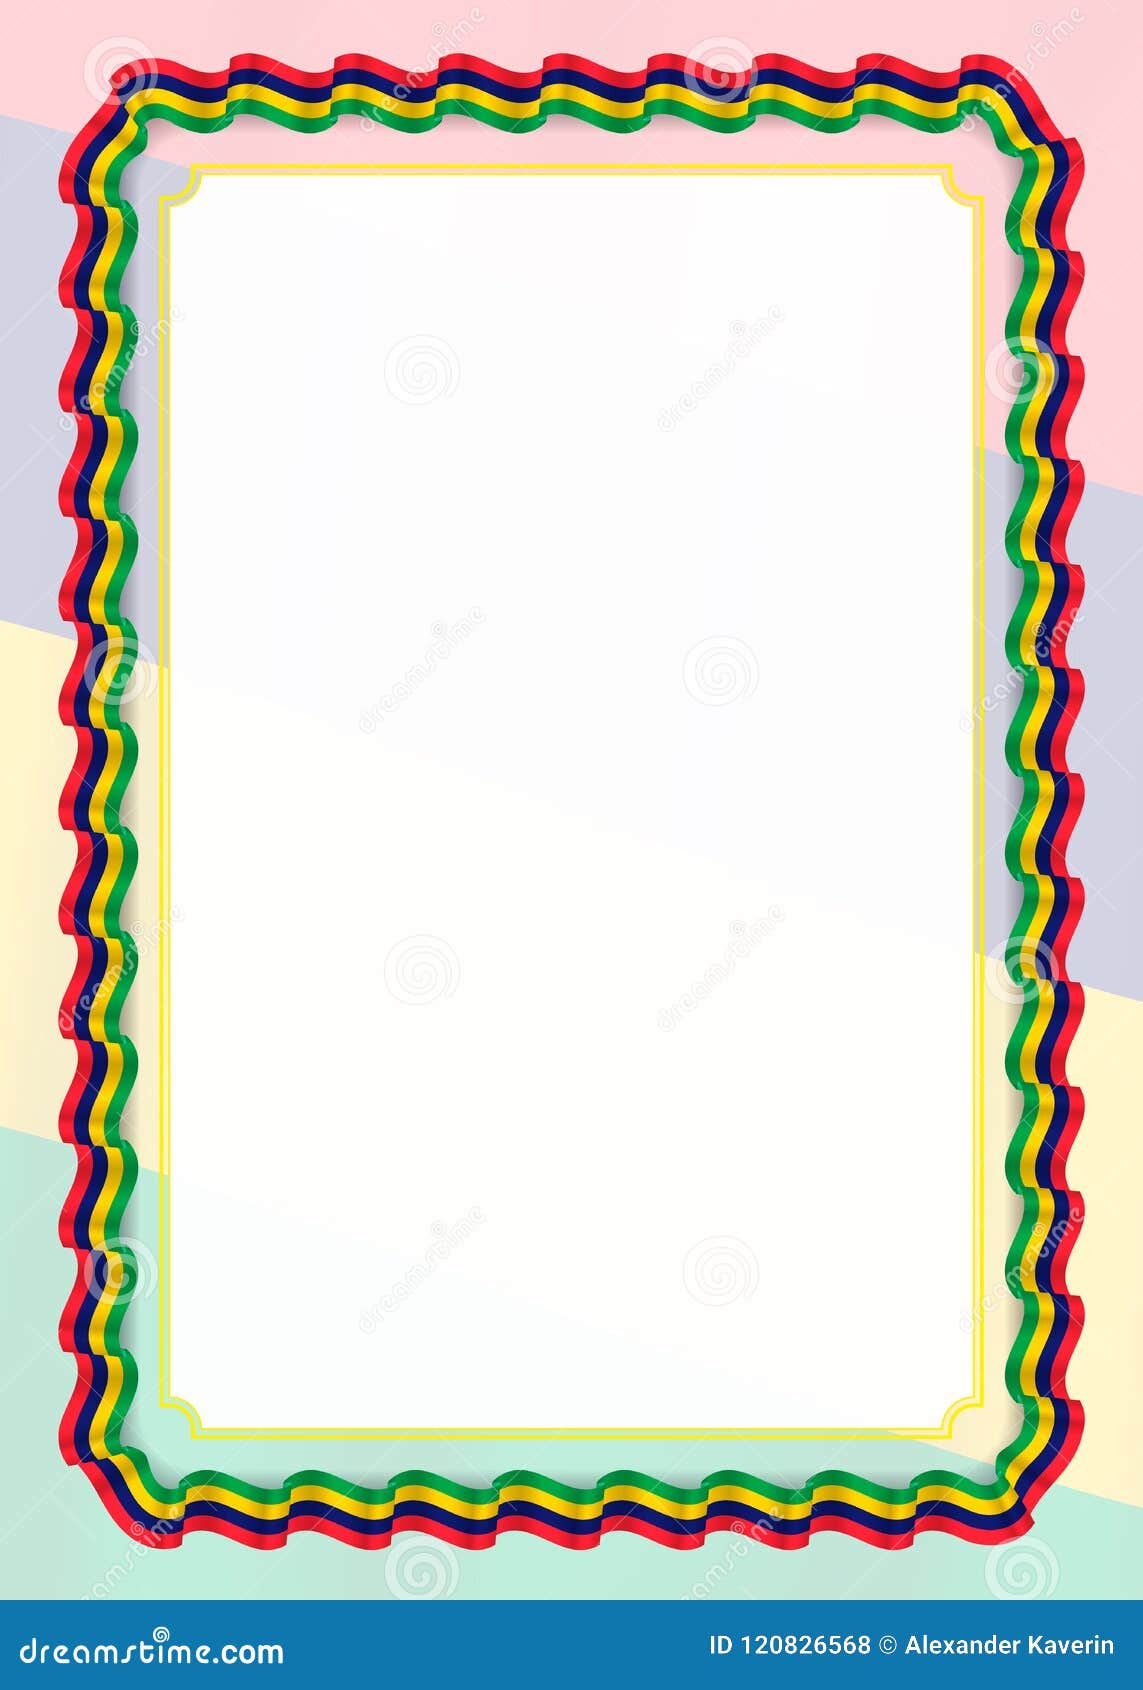 Frame and Border of Ribbon with Mauritius Flag, Template Elements for ...